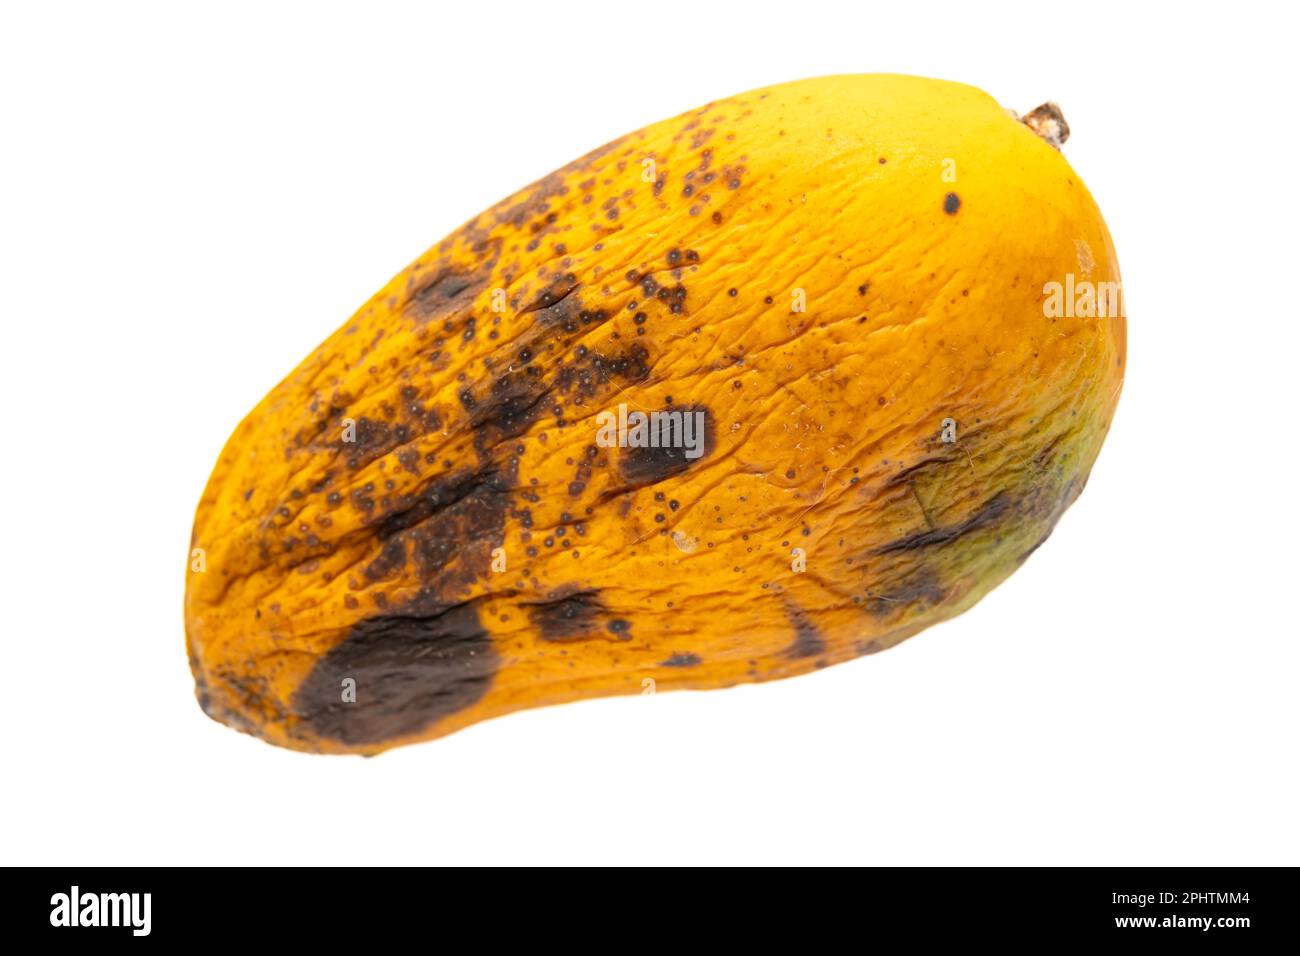 A rotten mango with wormhole Stock Photo by ©weerapat 153550888